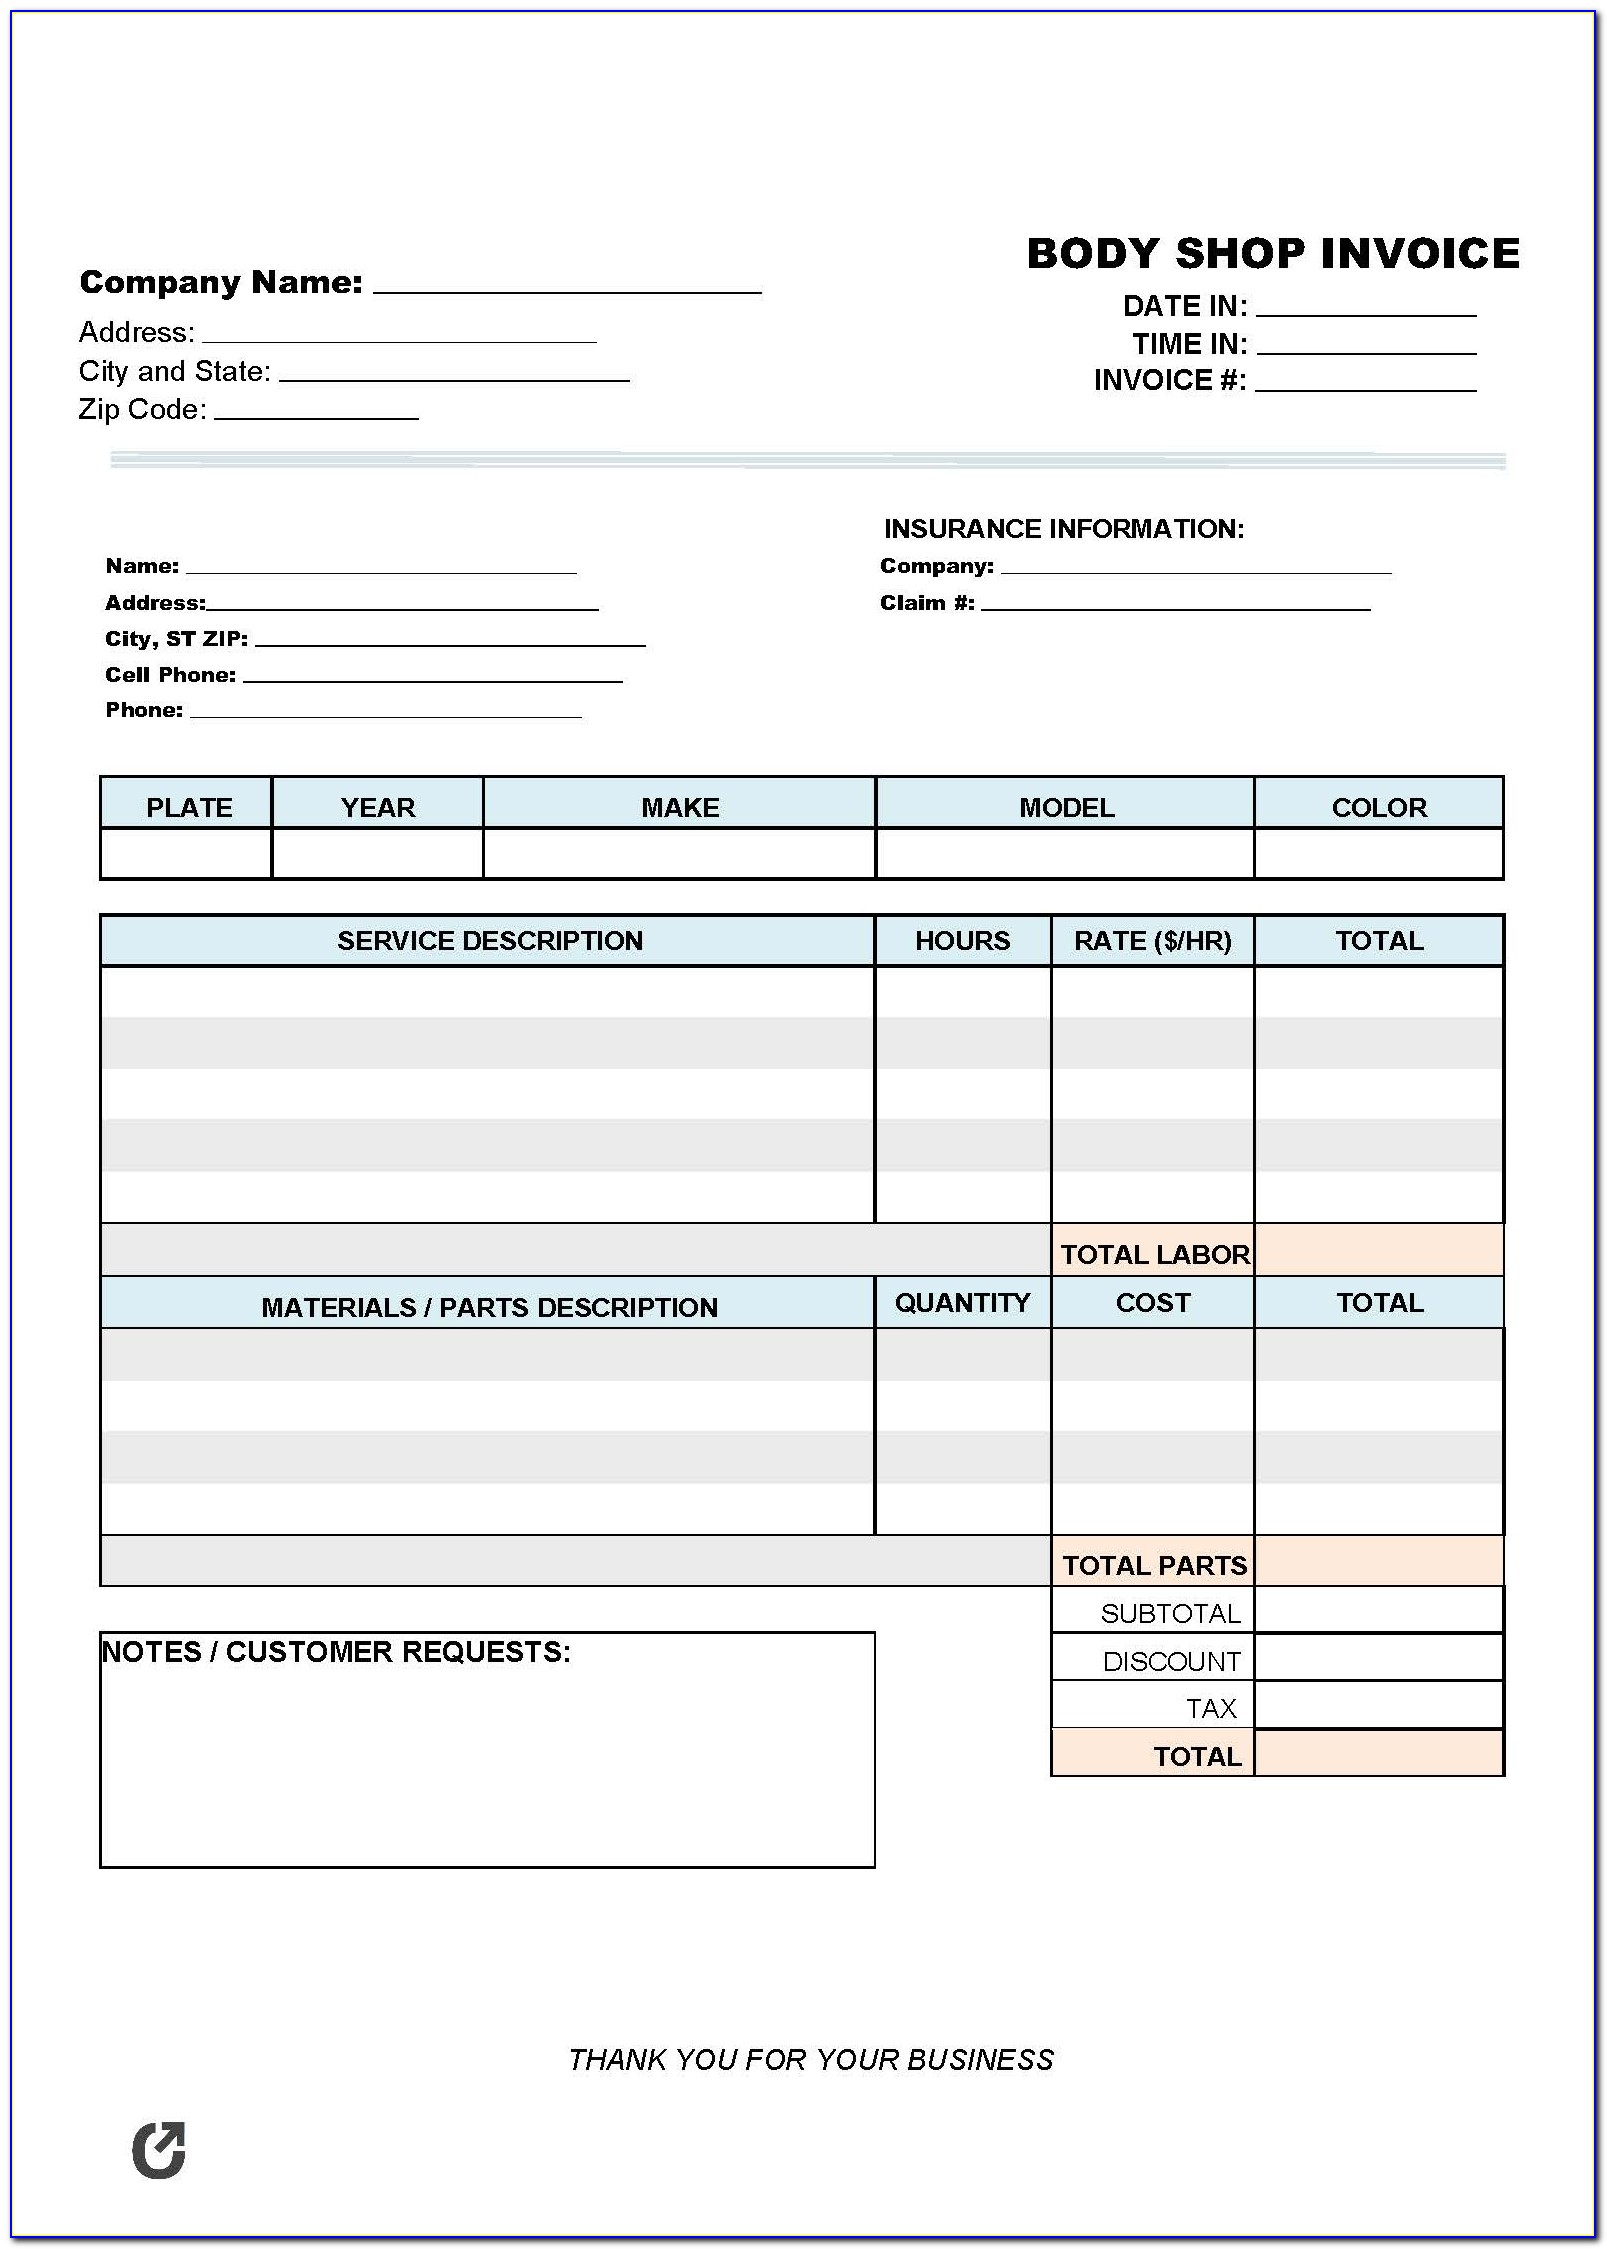 Body Shop Invoice Template Excel